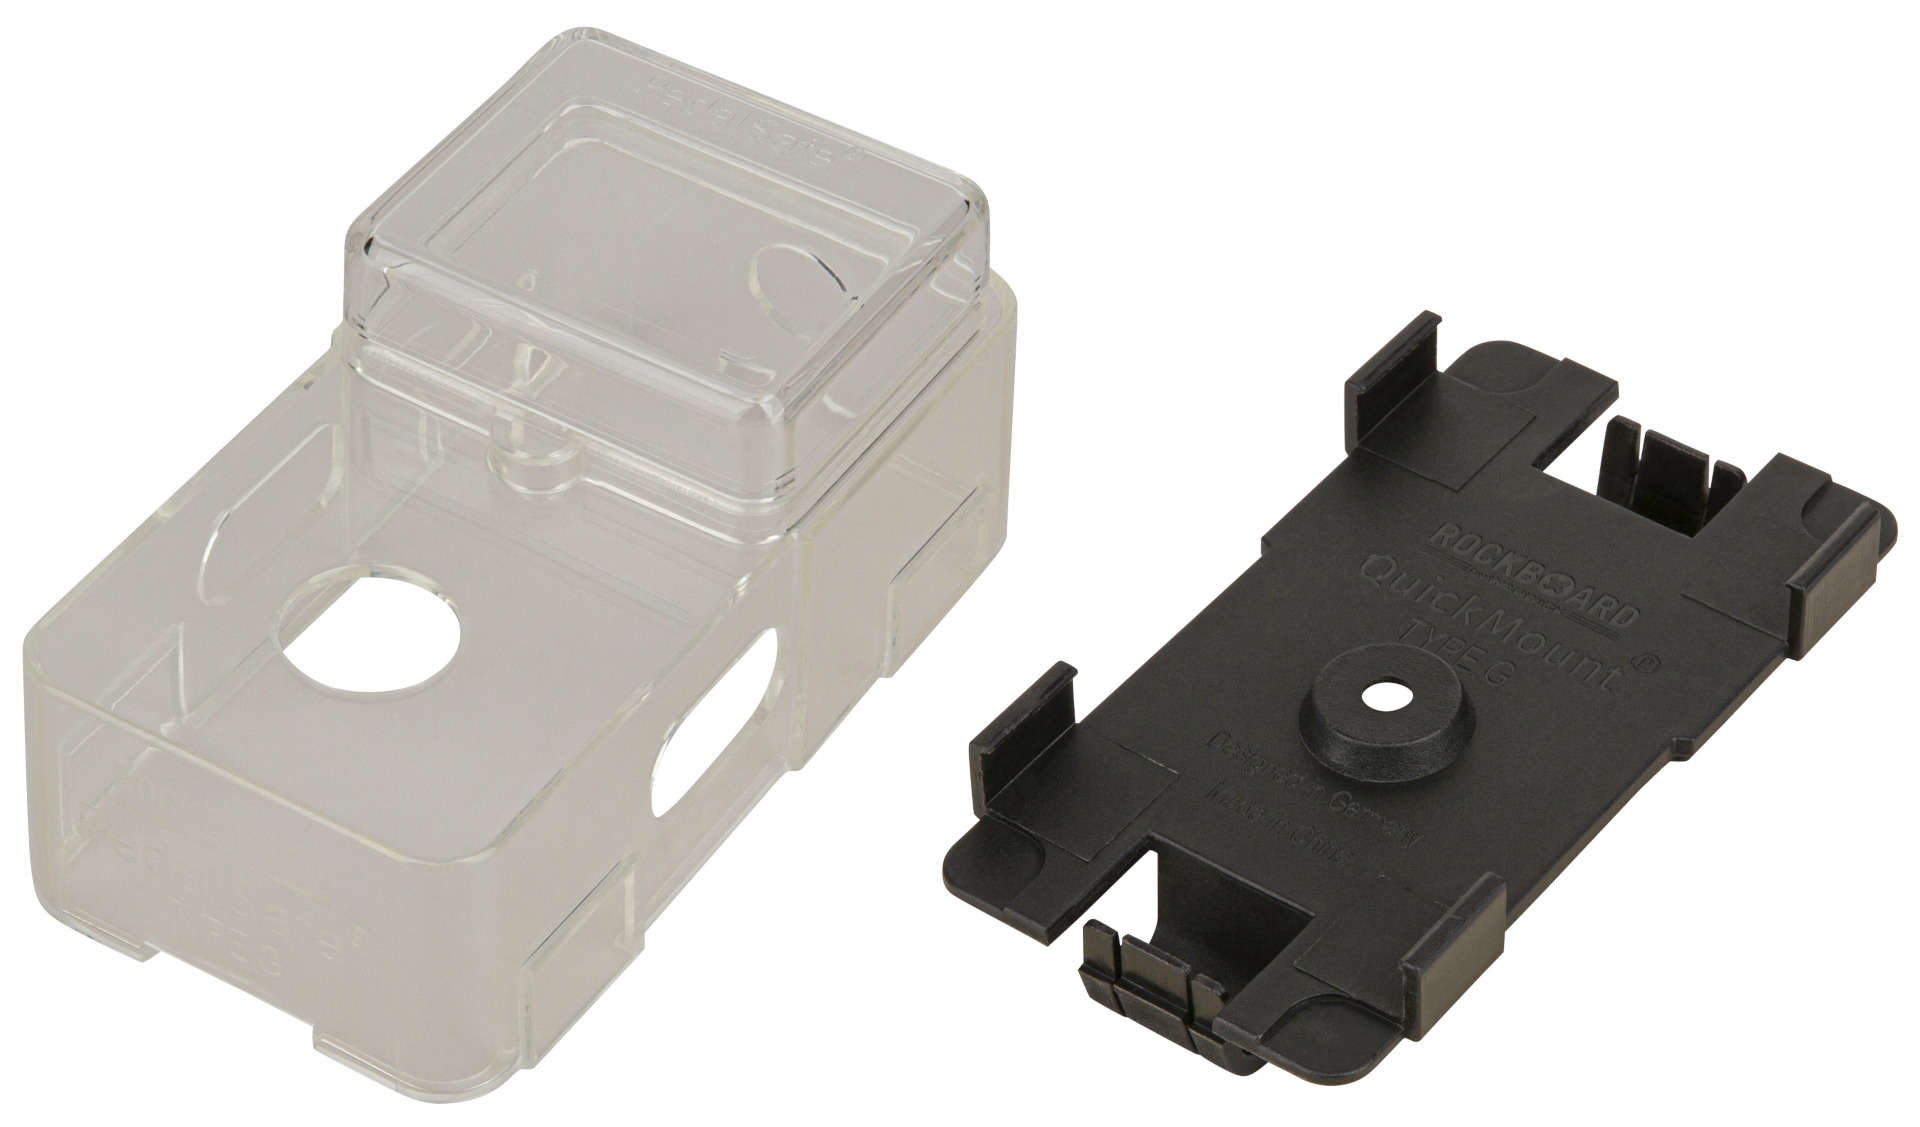 RockBoard PedalSafe Type G - Protective Cover And RockBoard Mounting Plate For Standard TC Electronic Pedals